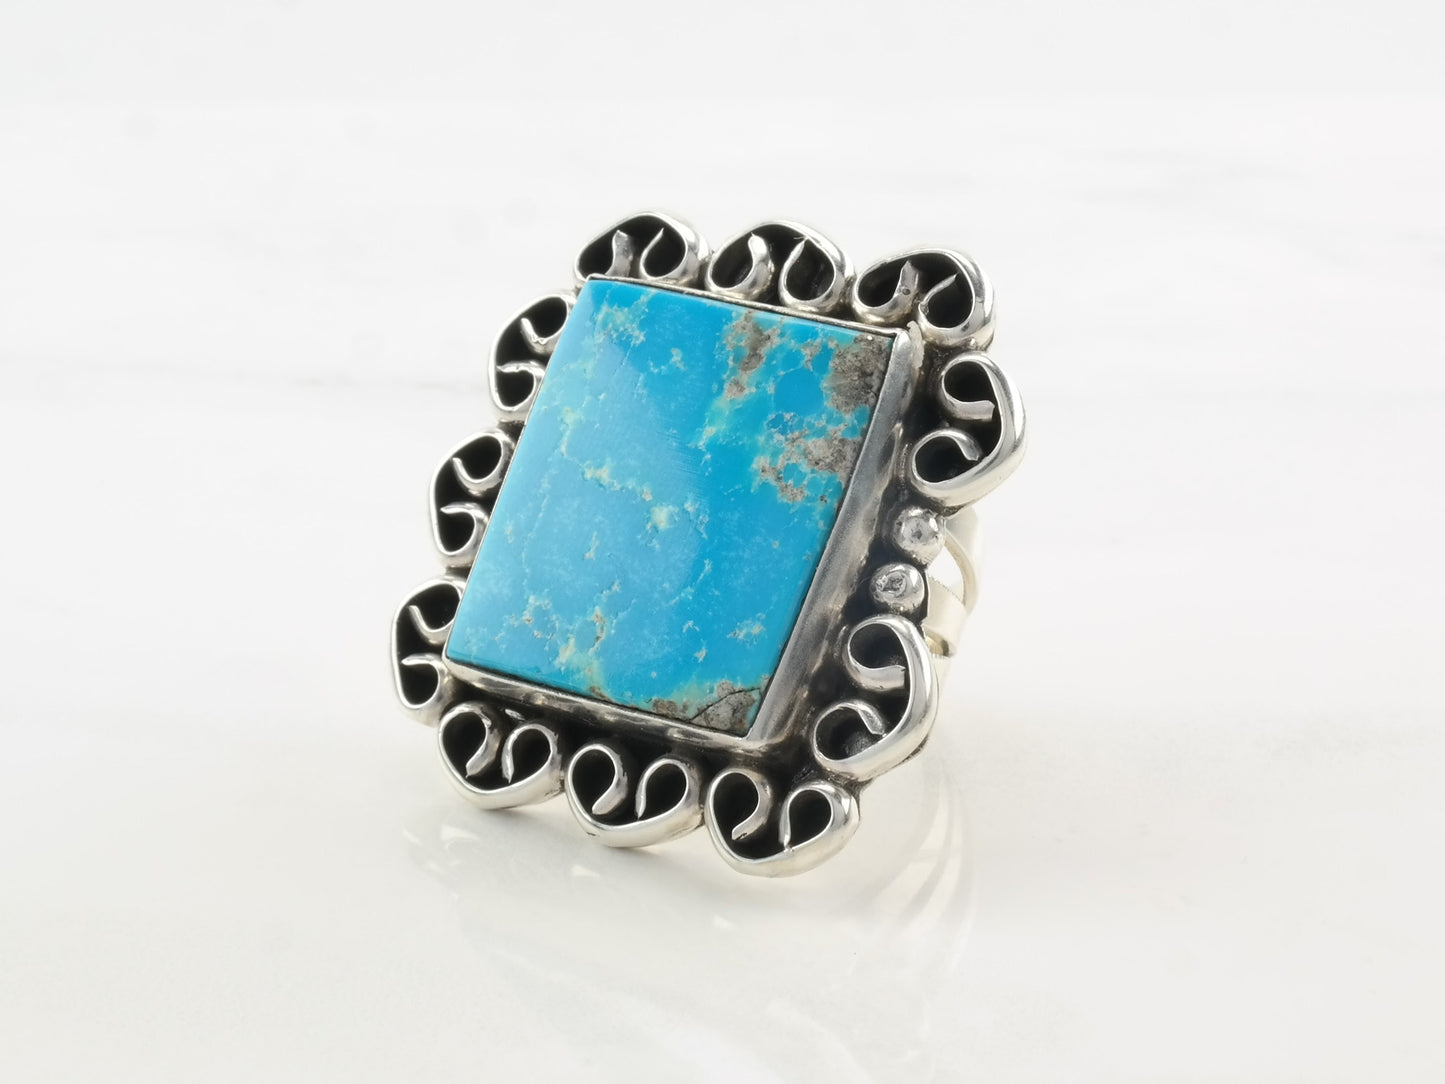 Large Southwest Silver Ring Square Turquoise Sterling Size 8 1/2